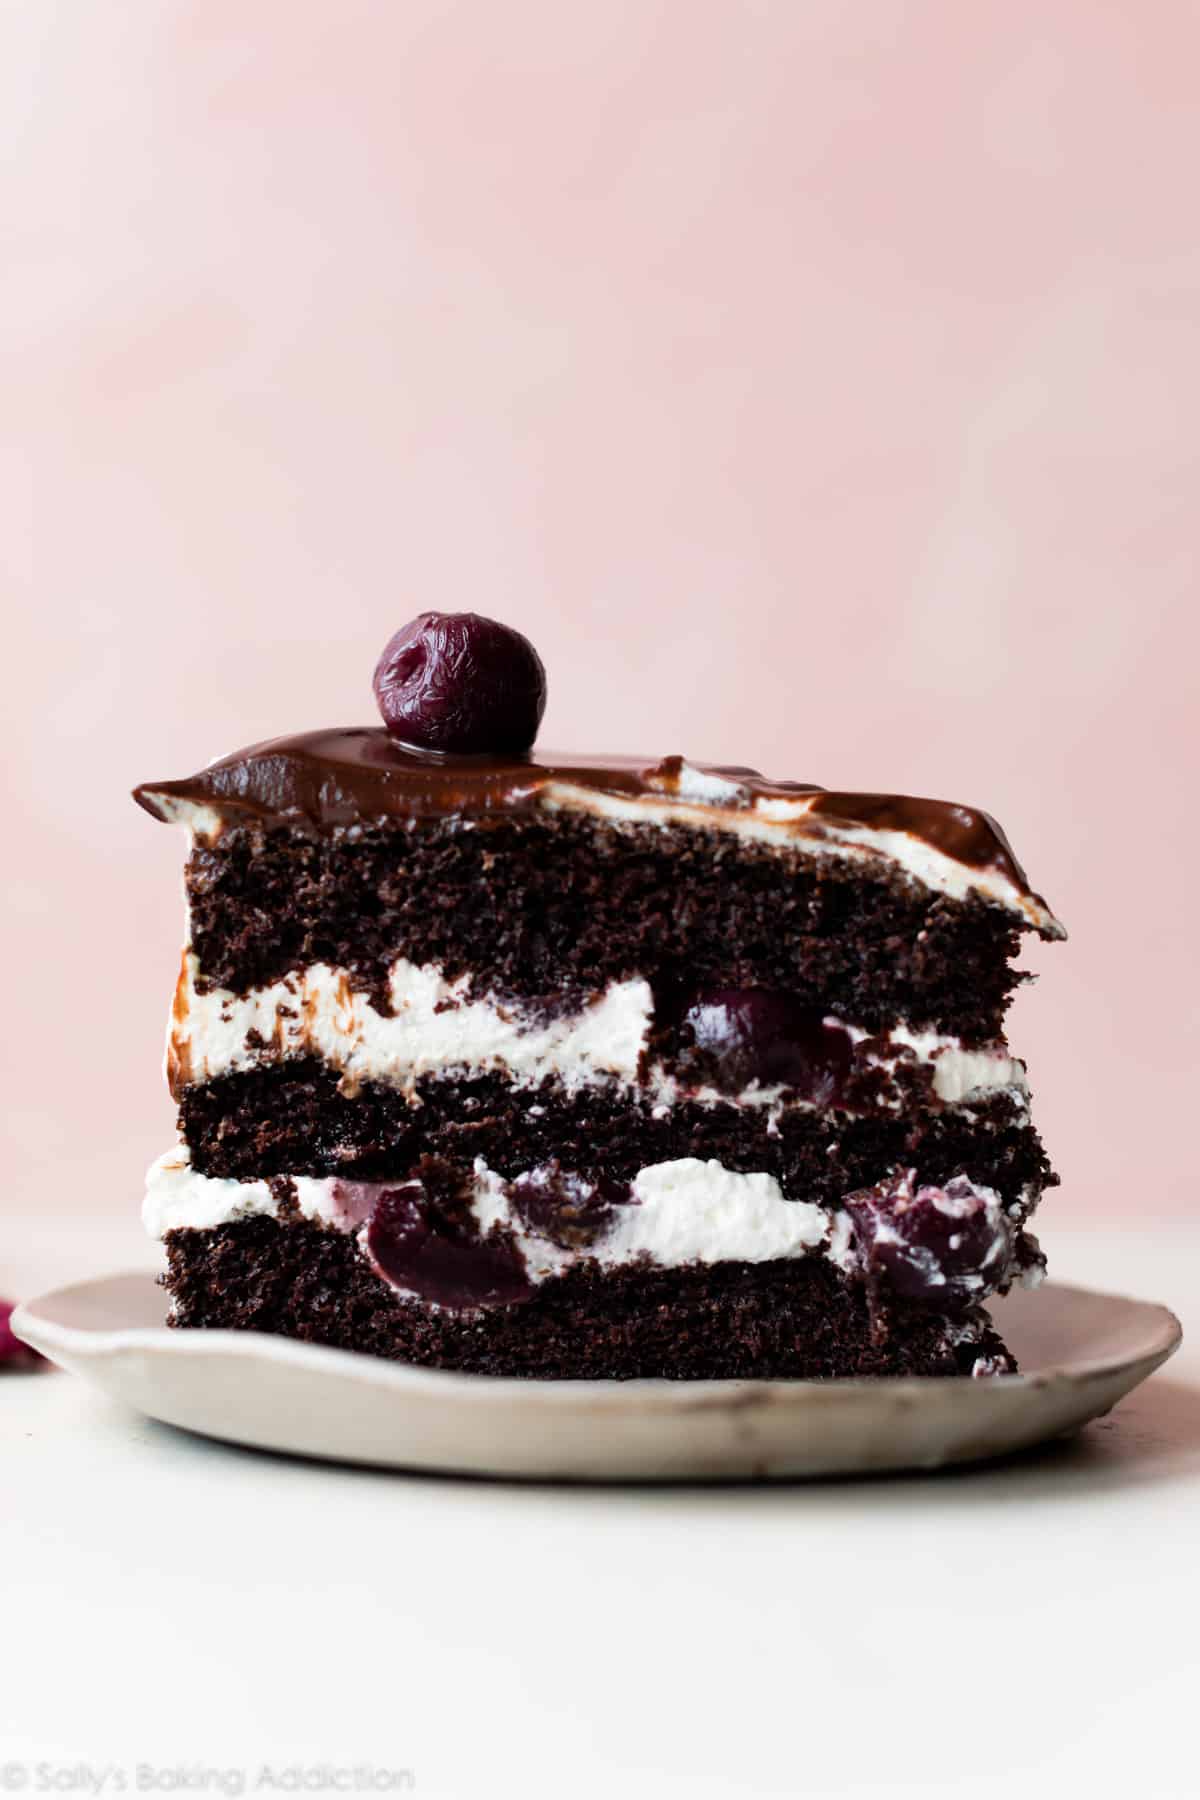 Slice of black forest cake on a plate